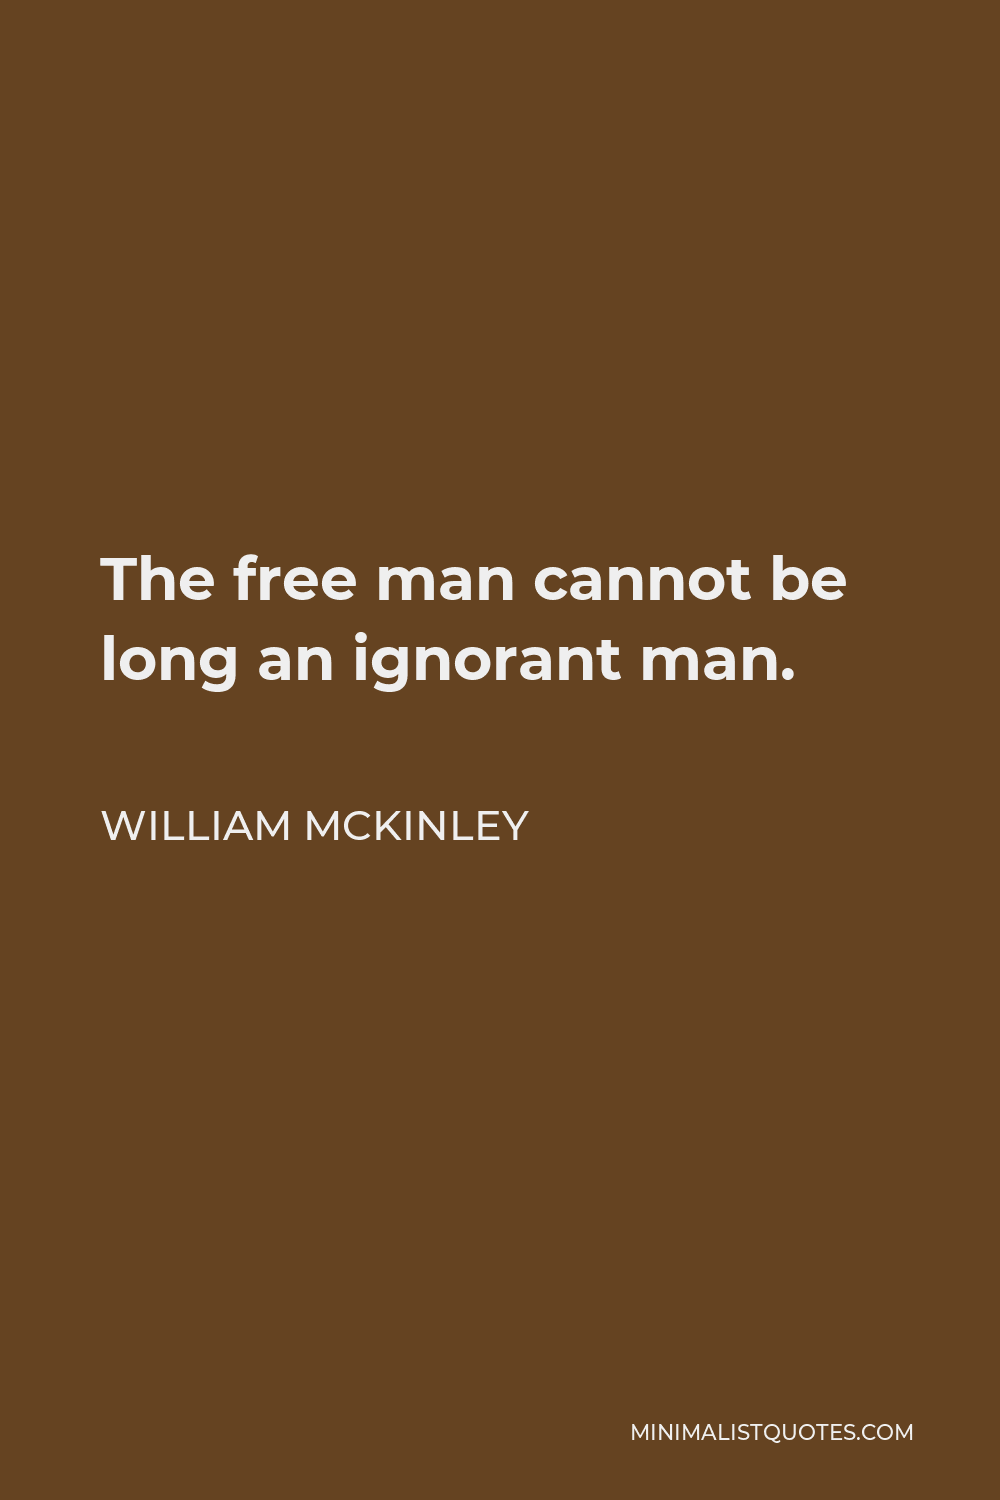 William McKinley Quote - The free man cannot be long an ignorant man.